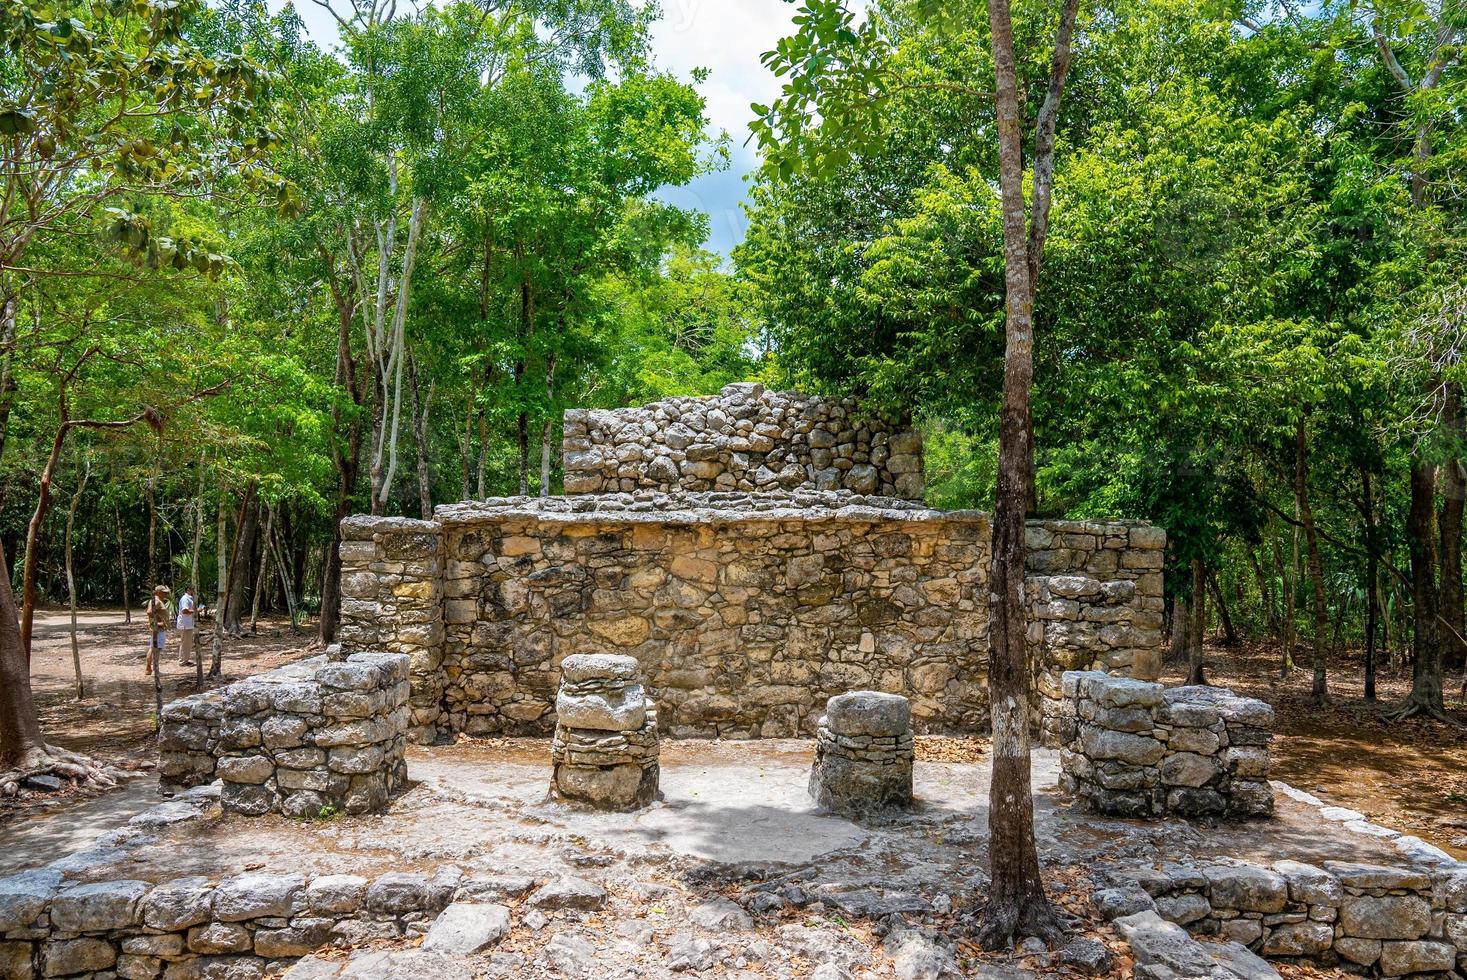 World heritage site and historic ruins of the Mayan city amidst forest photo